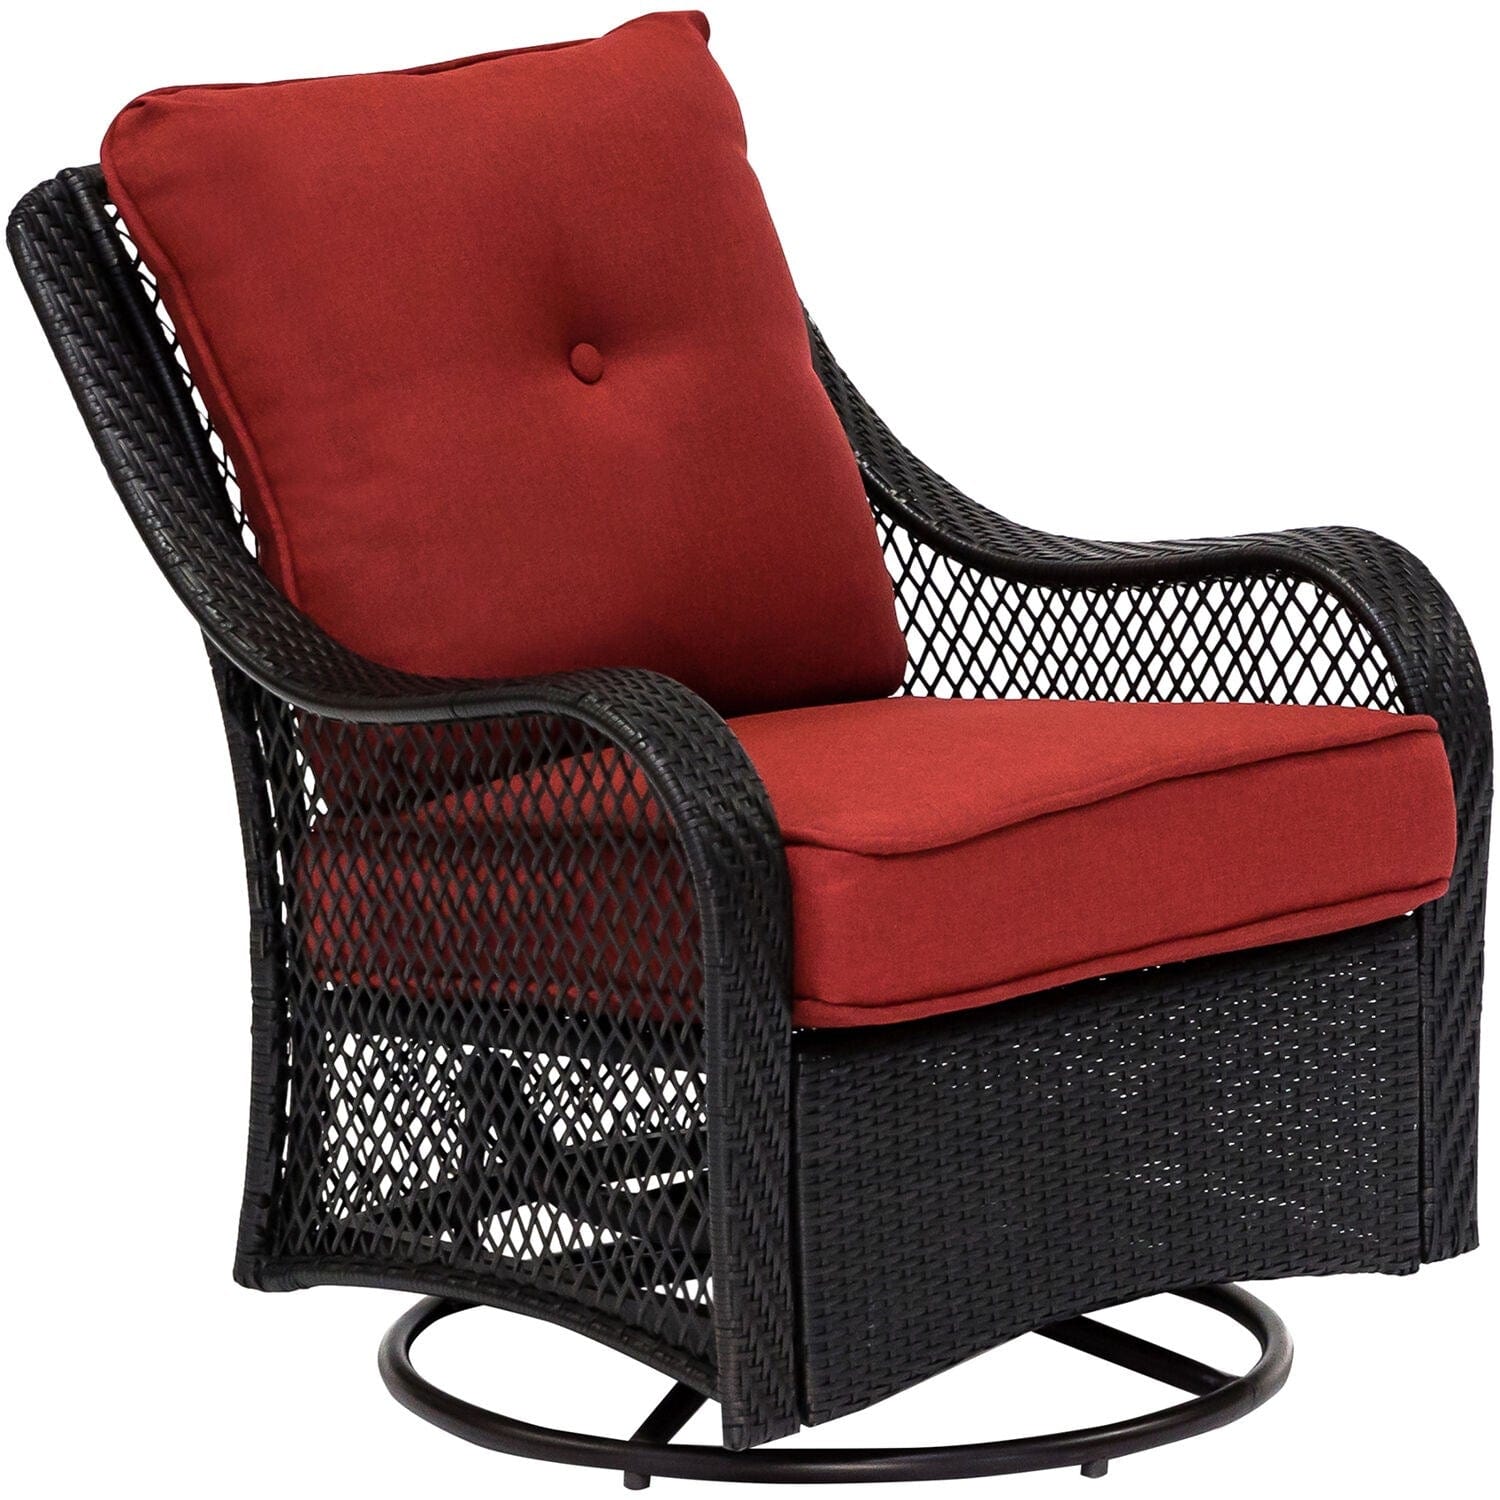 Hanover Fire Pit Chat Set Hanover Orleans 5-Piece Wicker Deep Seating Set with Four Cushioned Swivel Gliders in Red and 38-in. 30,000 BTU Slat-Top Gas Fire Pit Table | ORL5PCSLSW4FP-BRY